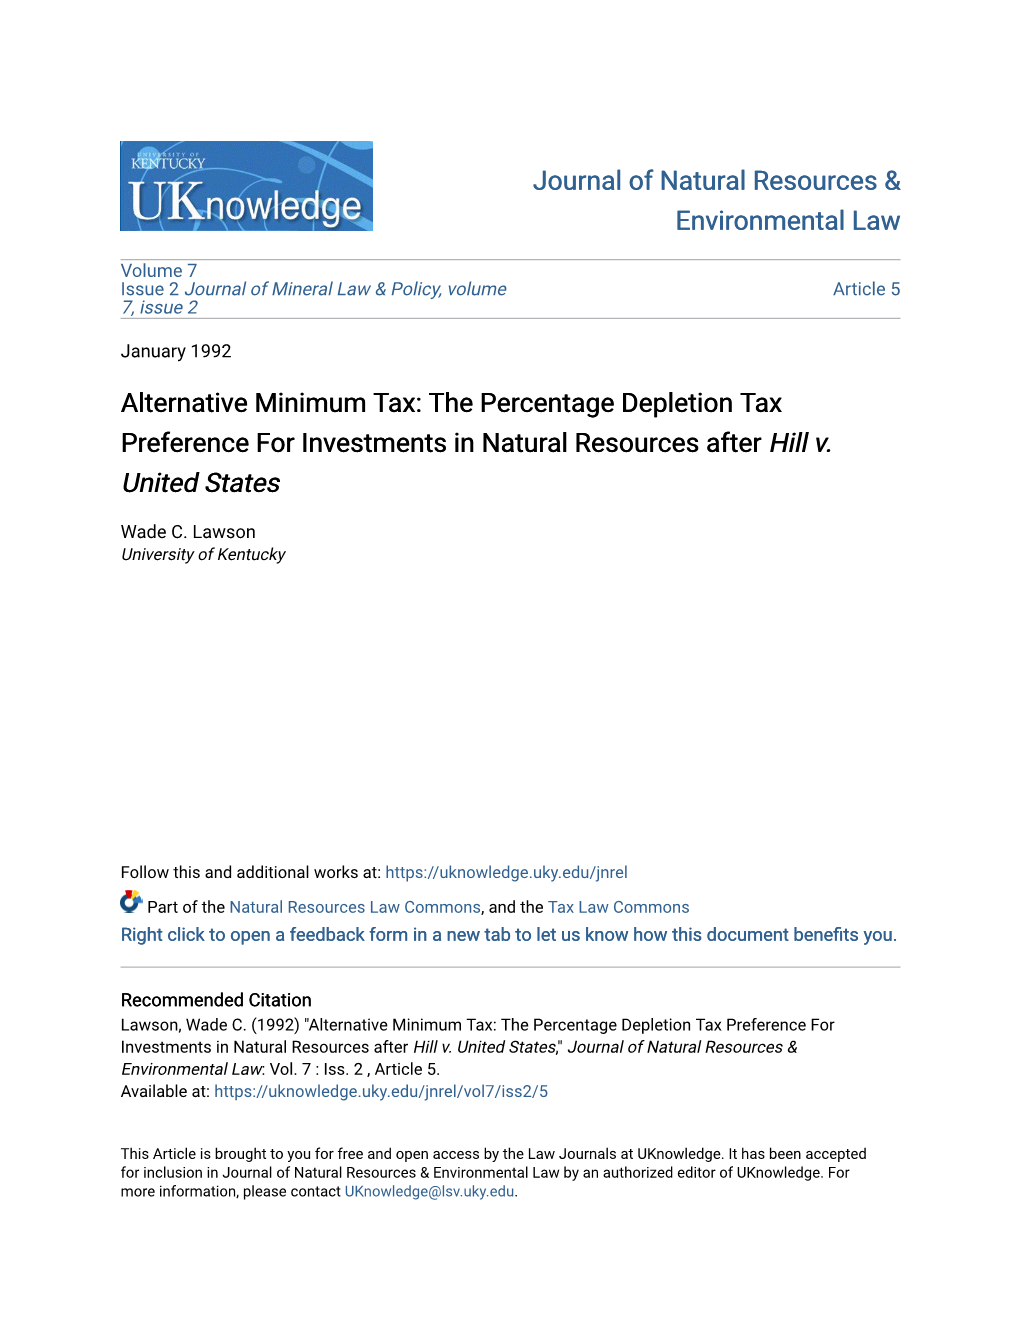 Alternative Minimum Tax: the Percentage Depletion Tax Preference for Investments in Natural Resources After Hill V